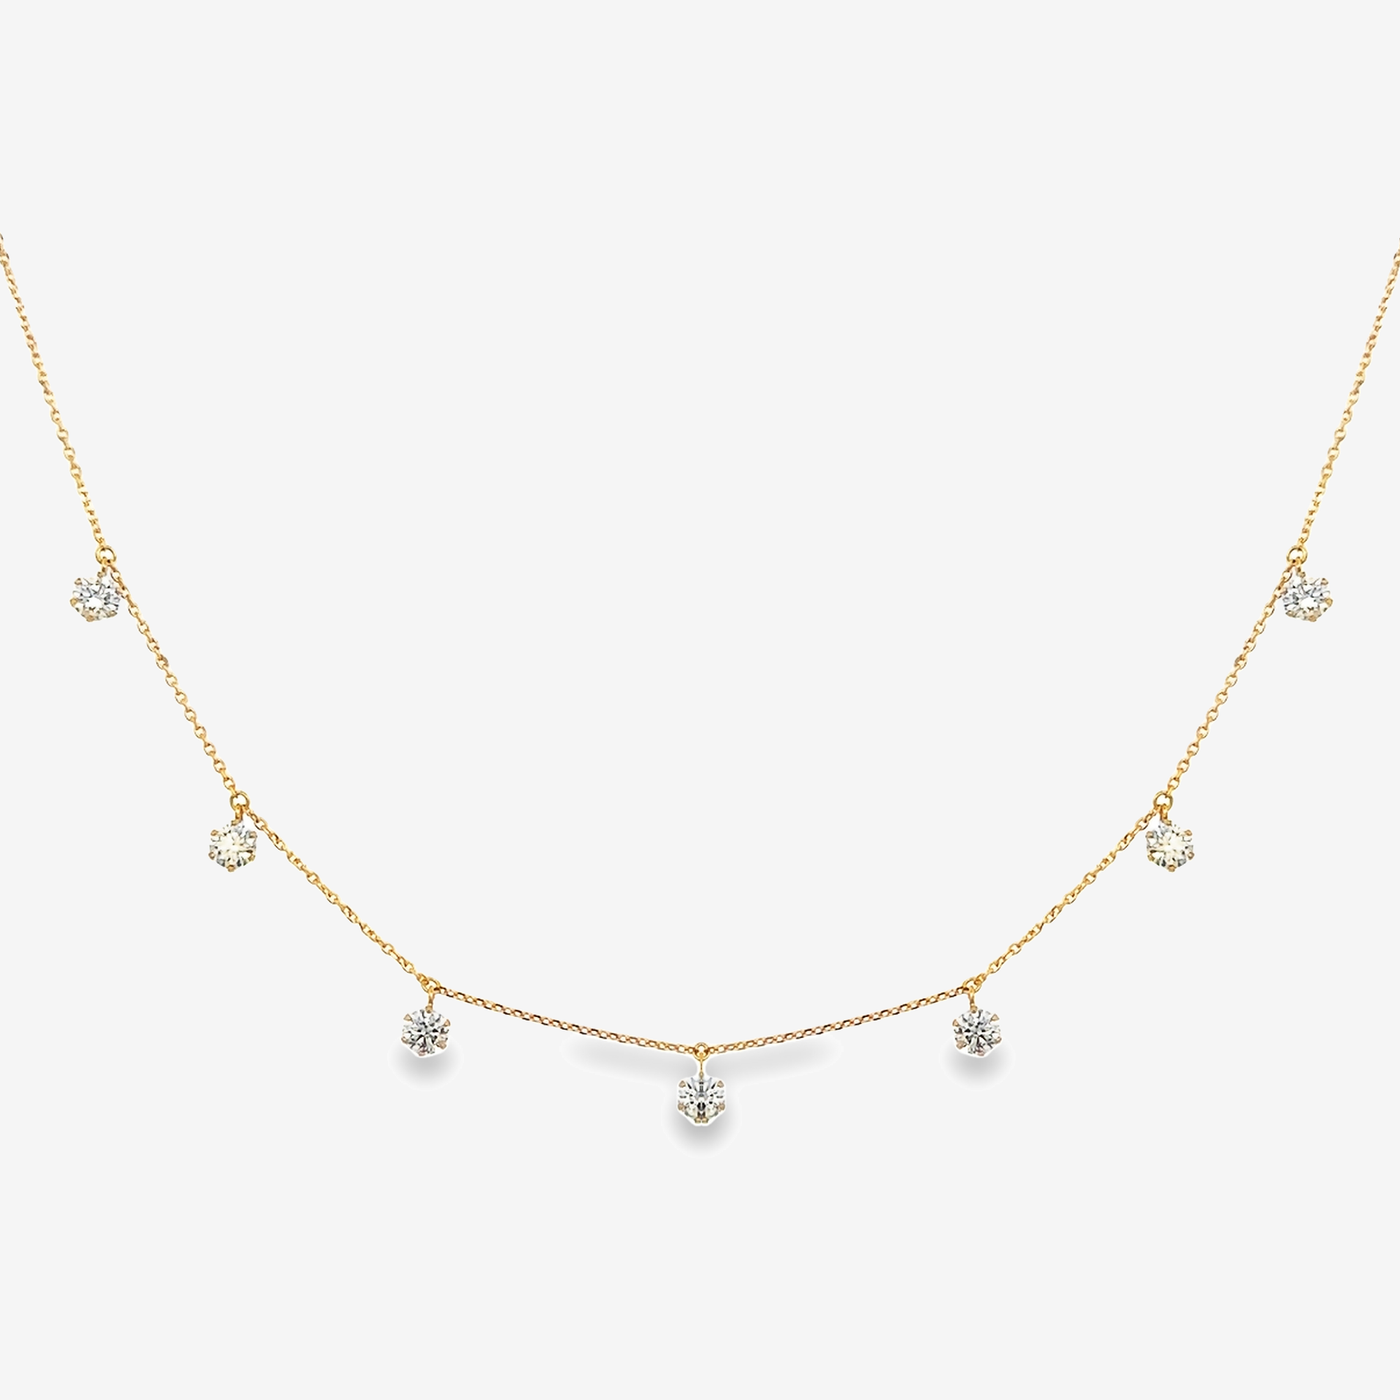 7 Drops By The Yard 1.10CT Diamond Necklace